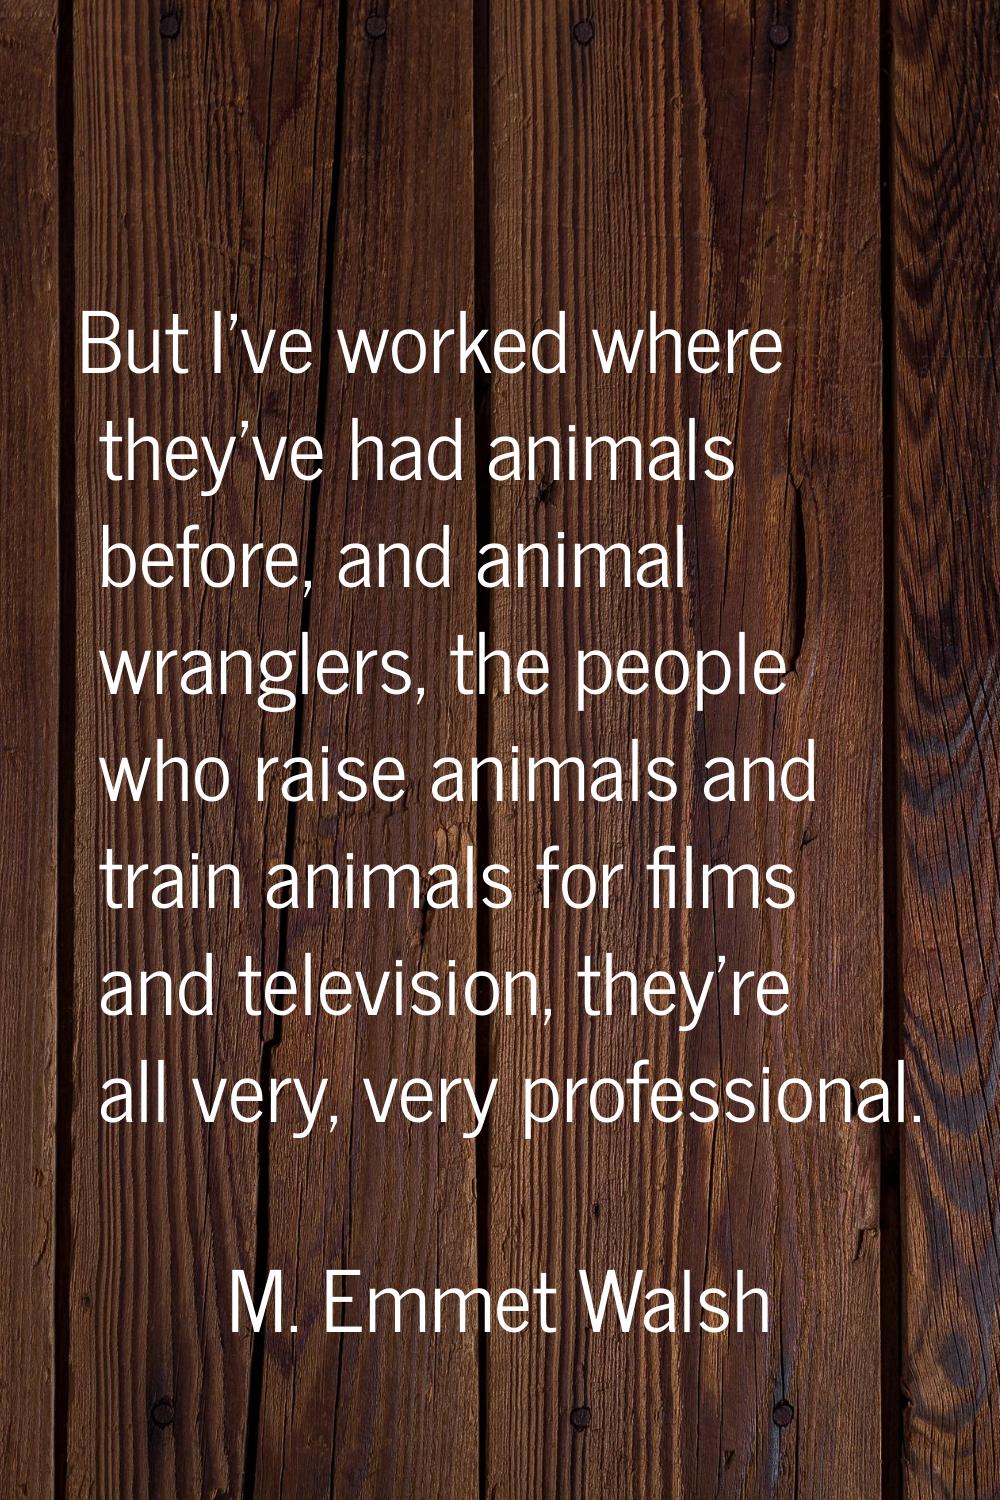 But I've worked where they've had animals before, and animal wranglers, the people who raise animal